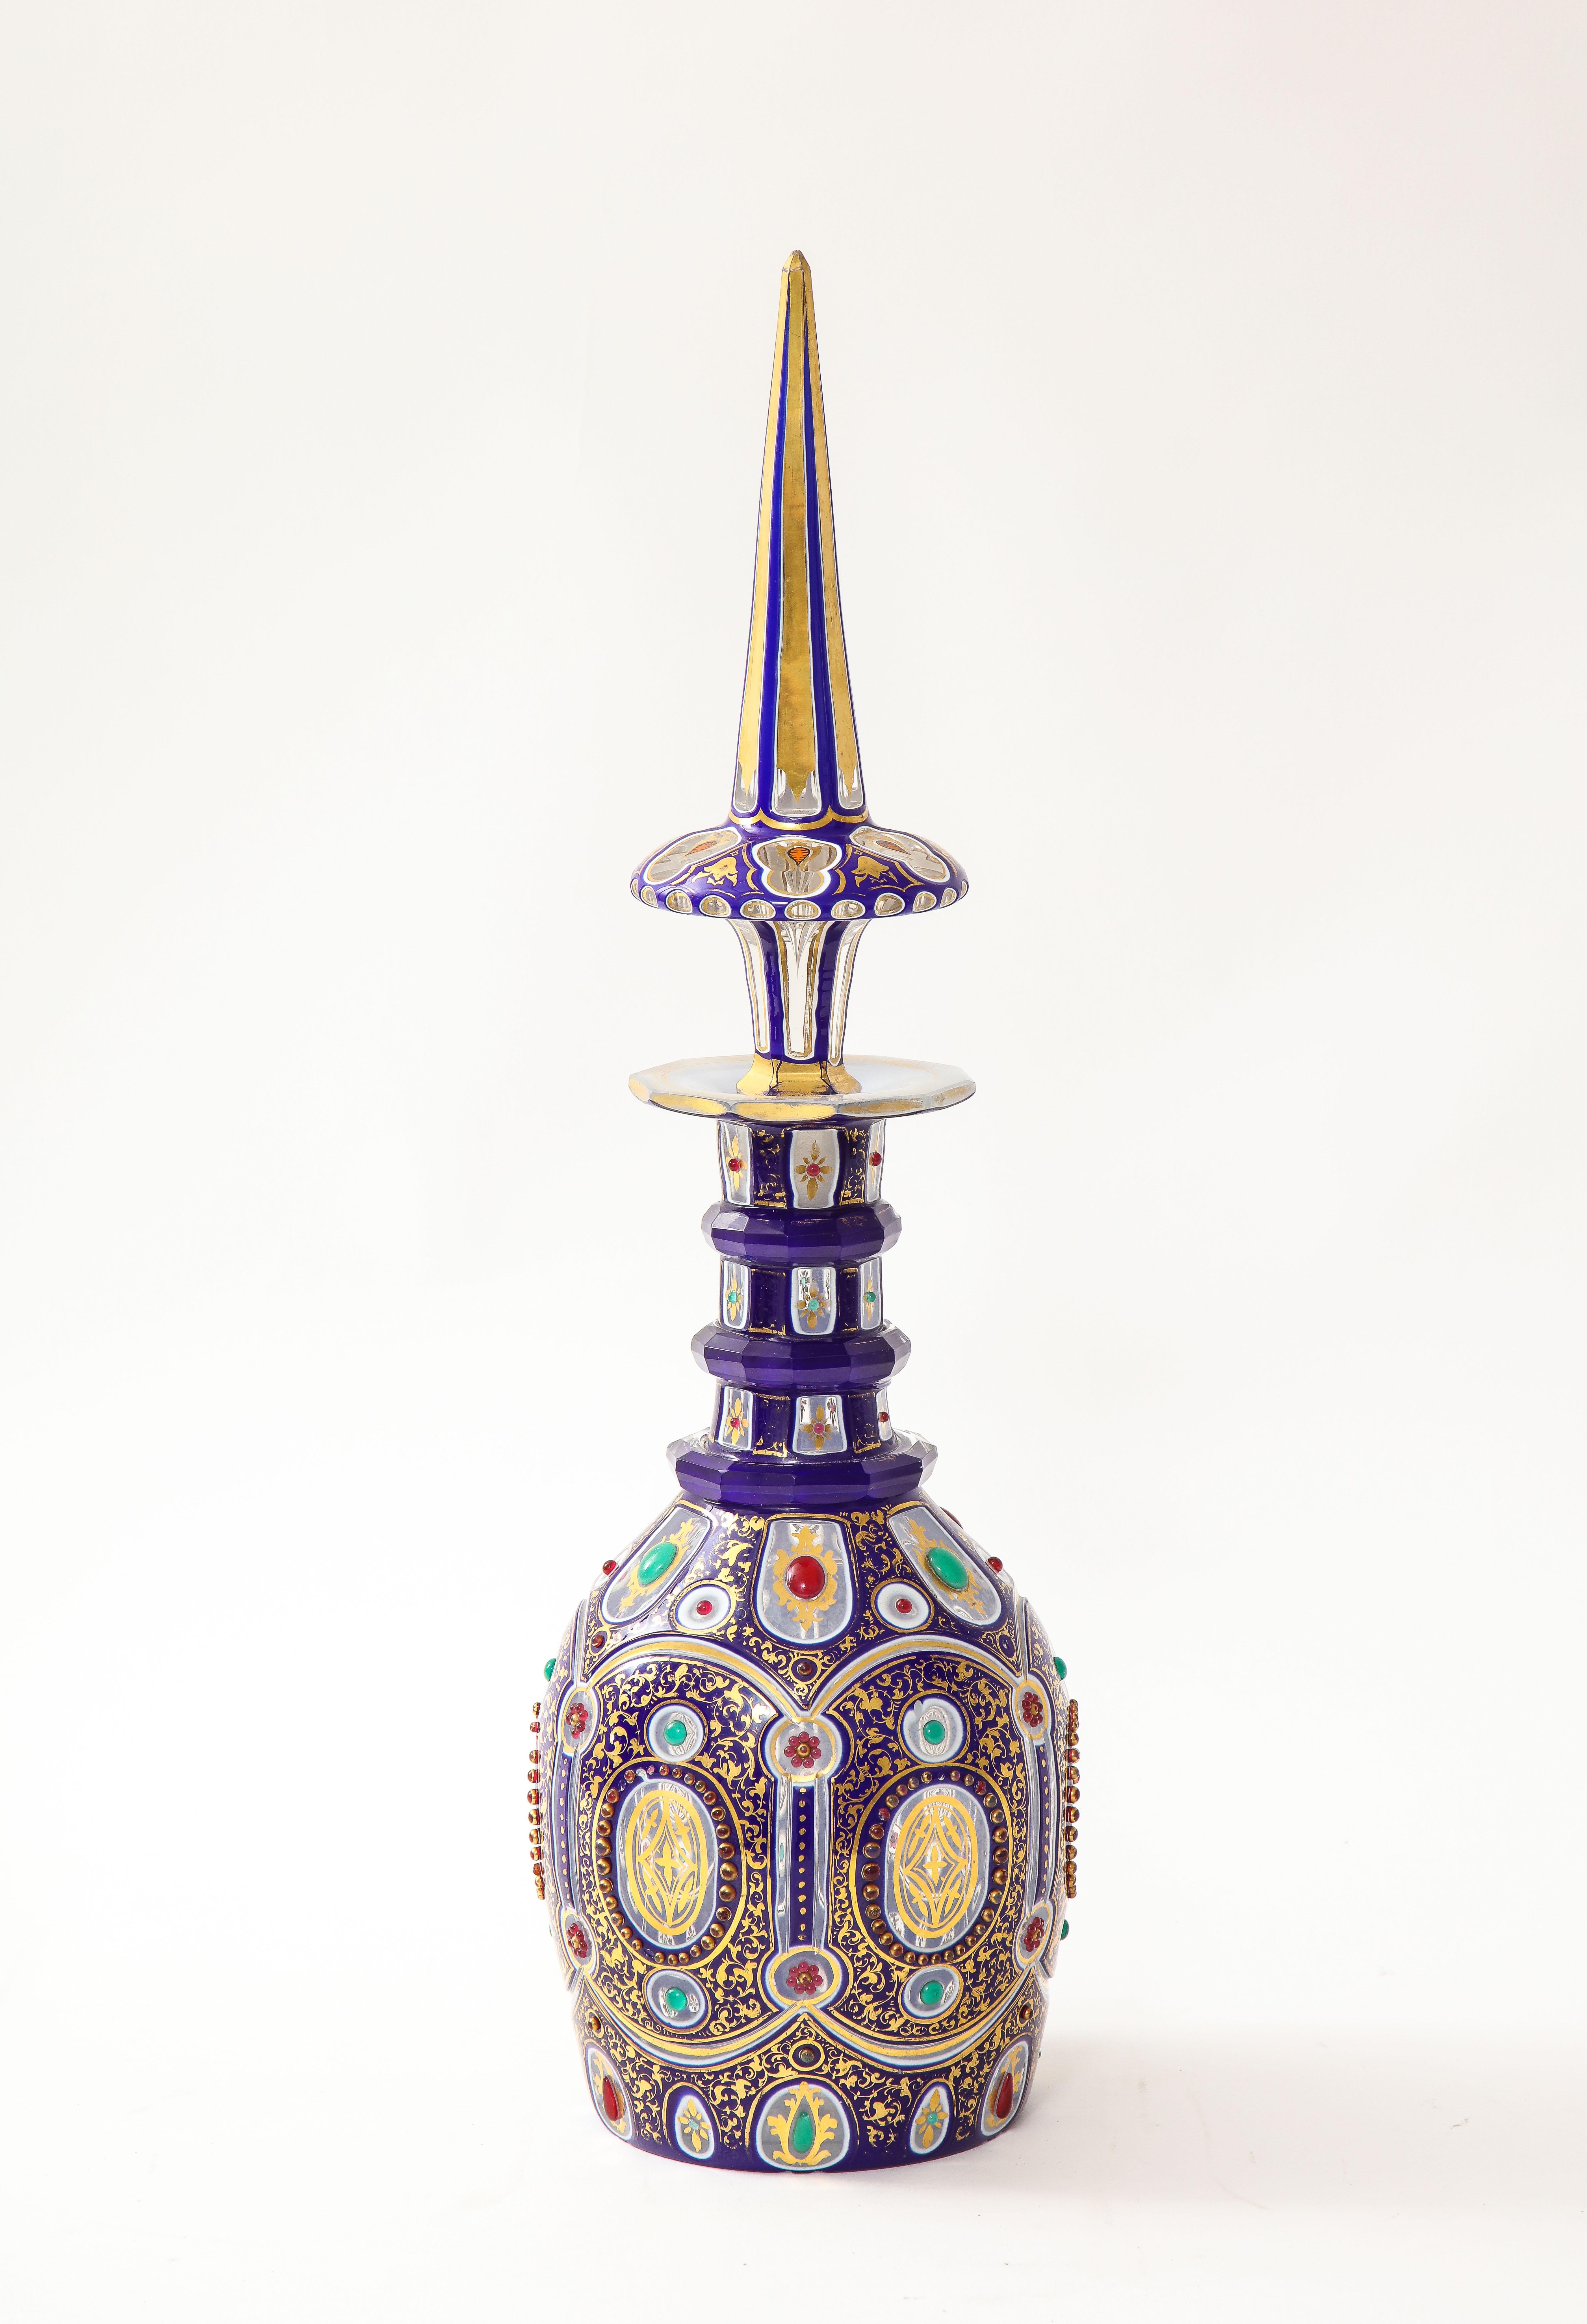 A Fine, Rare, and Highly Important 19th Century Bohemian Blue-Over-White-Over-Clear Triple Overlay Crystal Jeweled and Covered Imperial Decanter. The decanter is crafted from clear glass which is partially covered with a blue-over-white overlay,